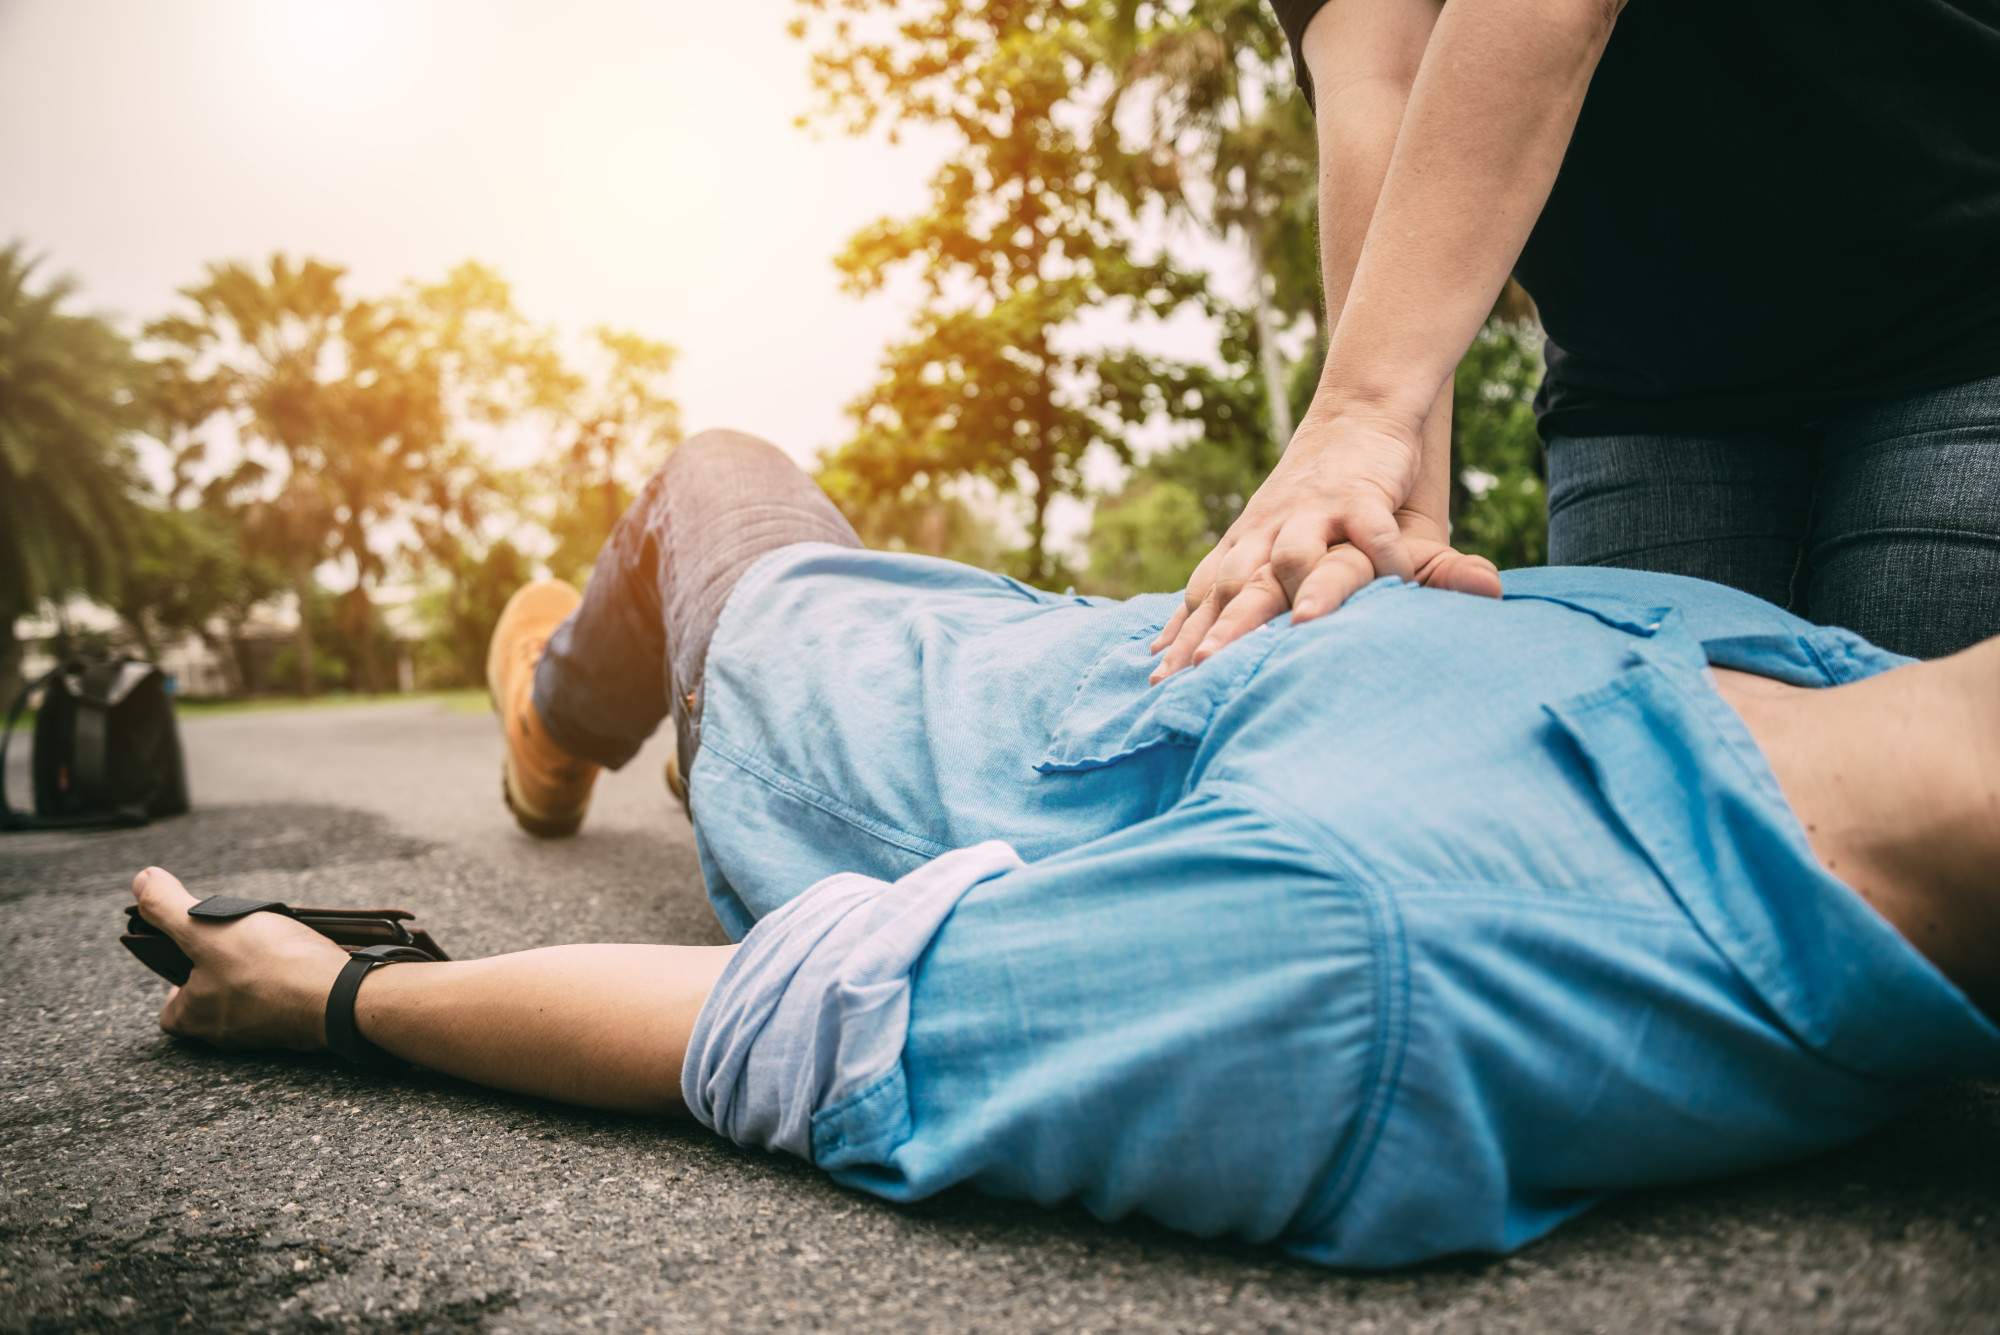 CPR vs BLS: What Are the Differences?